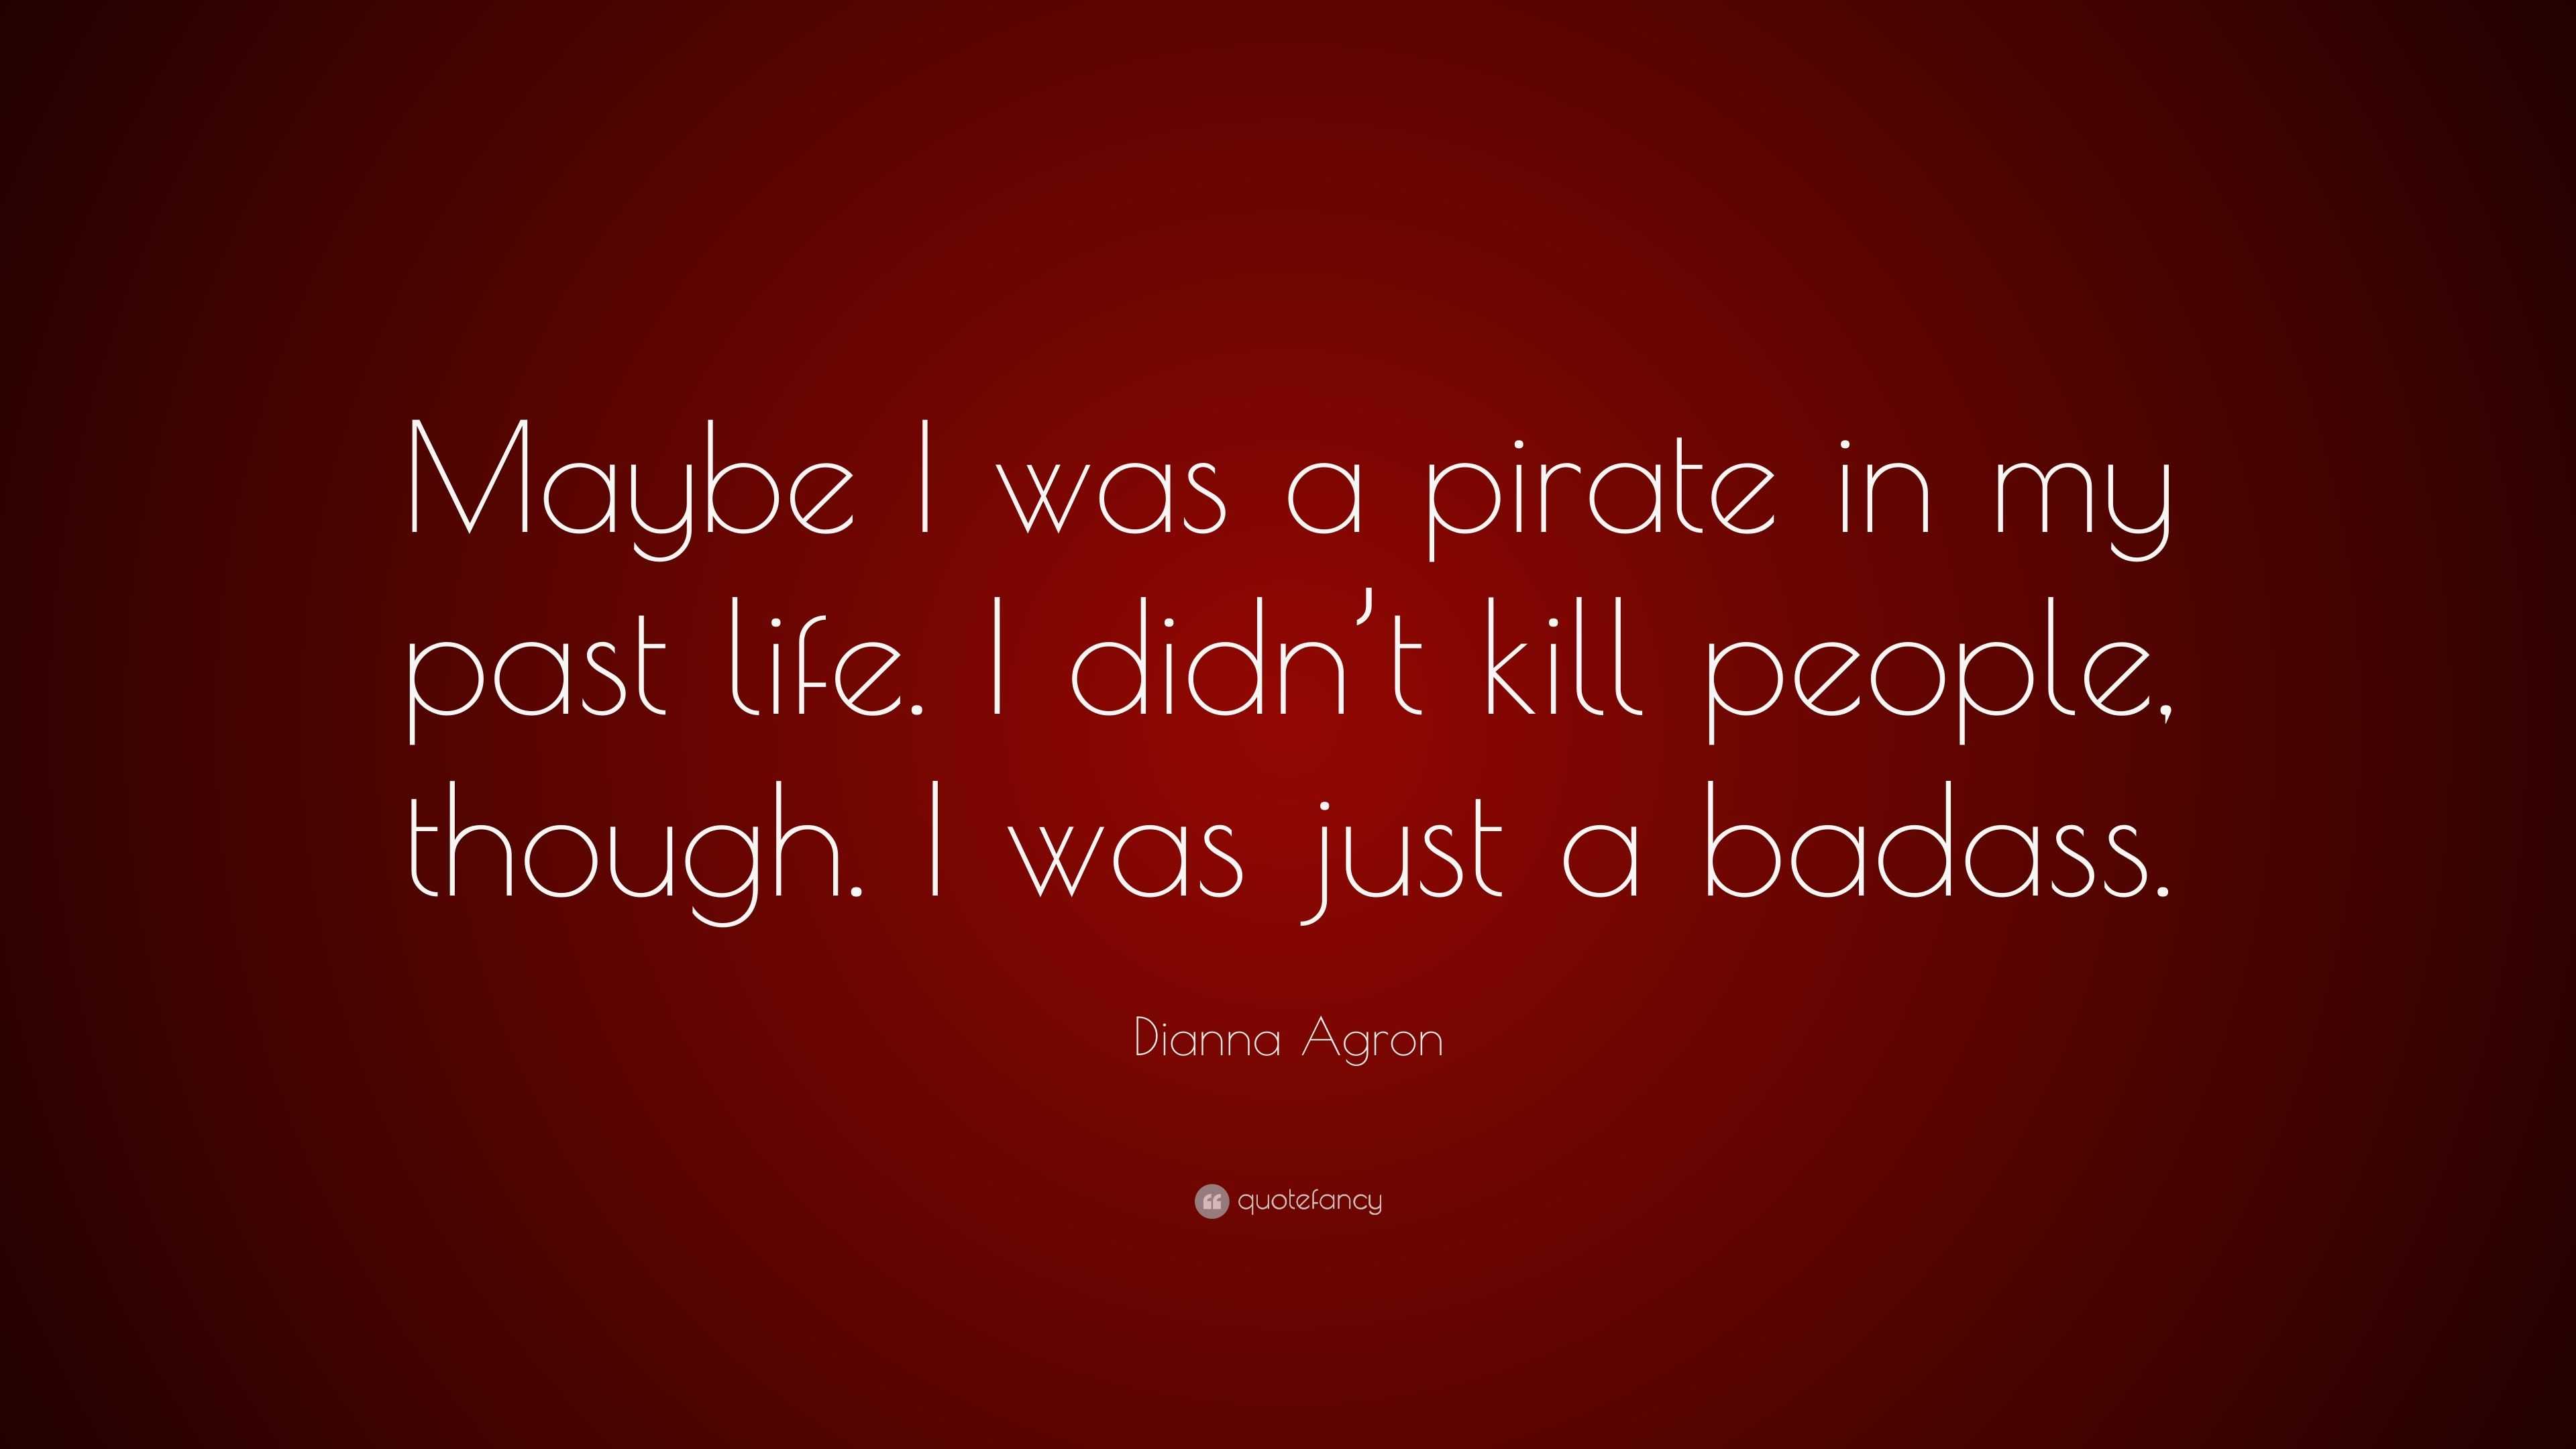 Dianna Agron Quote “Maybe I was a pirate in my past life I